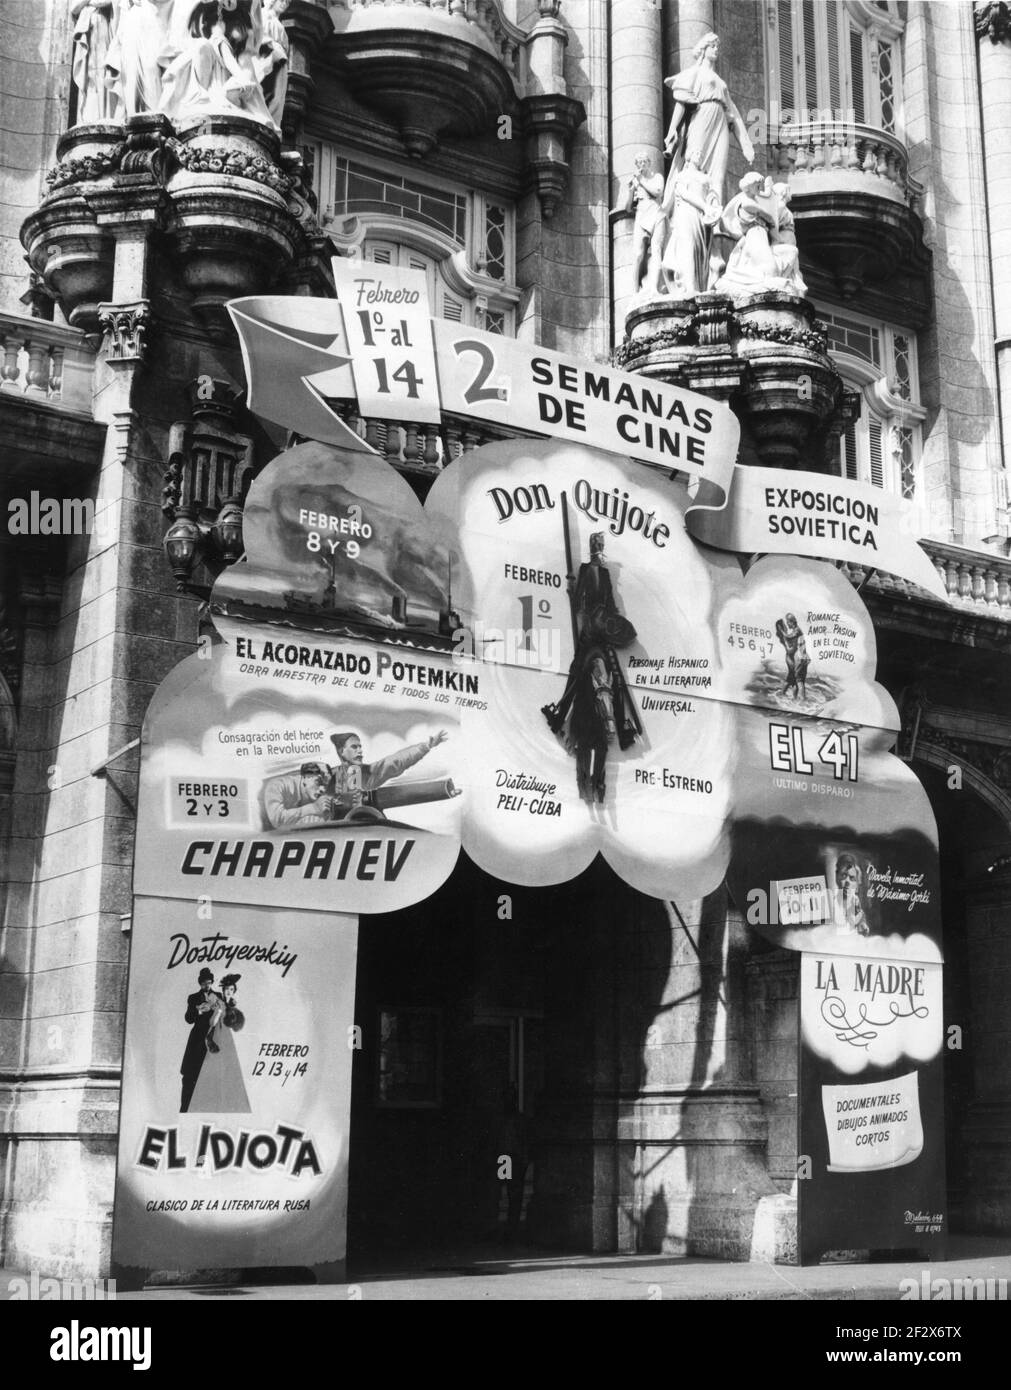 Cinema / Movie Theatre in Havana Cuba in February 1960 showing a Season of Classic Russian Films including BATTLESHIP POTEMKIN (1925) CHAPAYEV (1934) THE IDIOT (1958) DON QUIXOTE (1957)  THE FORTY-FIRST ((1956) and MOTHER (1956) following the Cuban Revolution in 1959 led by Fidel Castro and Che Guevara against dictator Fulgencio Batista Stock Photo